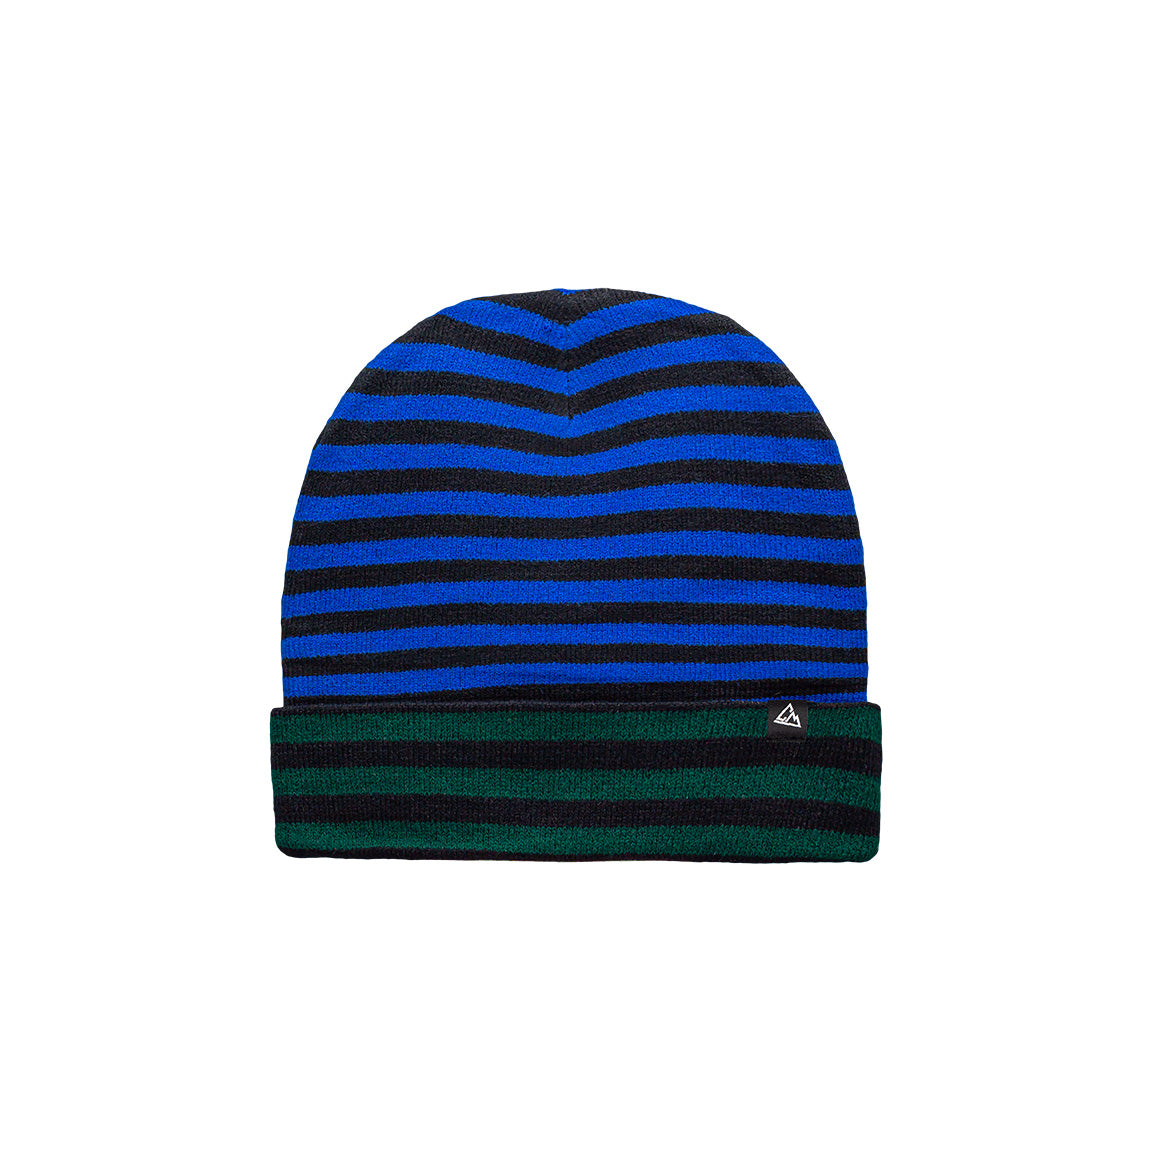 A knit beanie with bright blue and navy stripes, accented by a green and black striped band at the bottom, adorned with a small triangular logo.